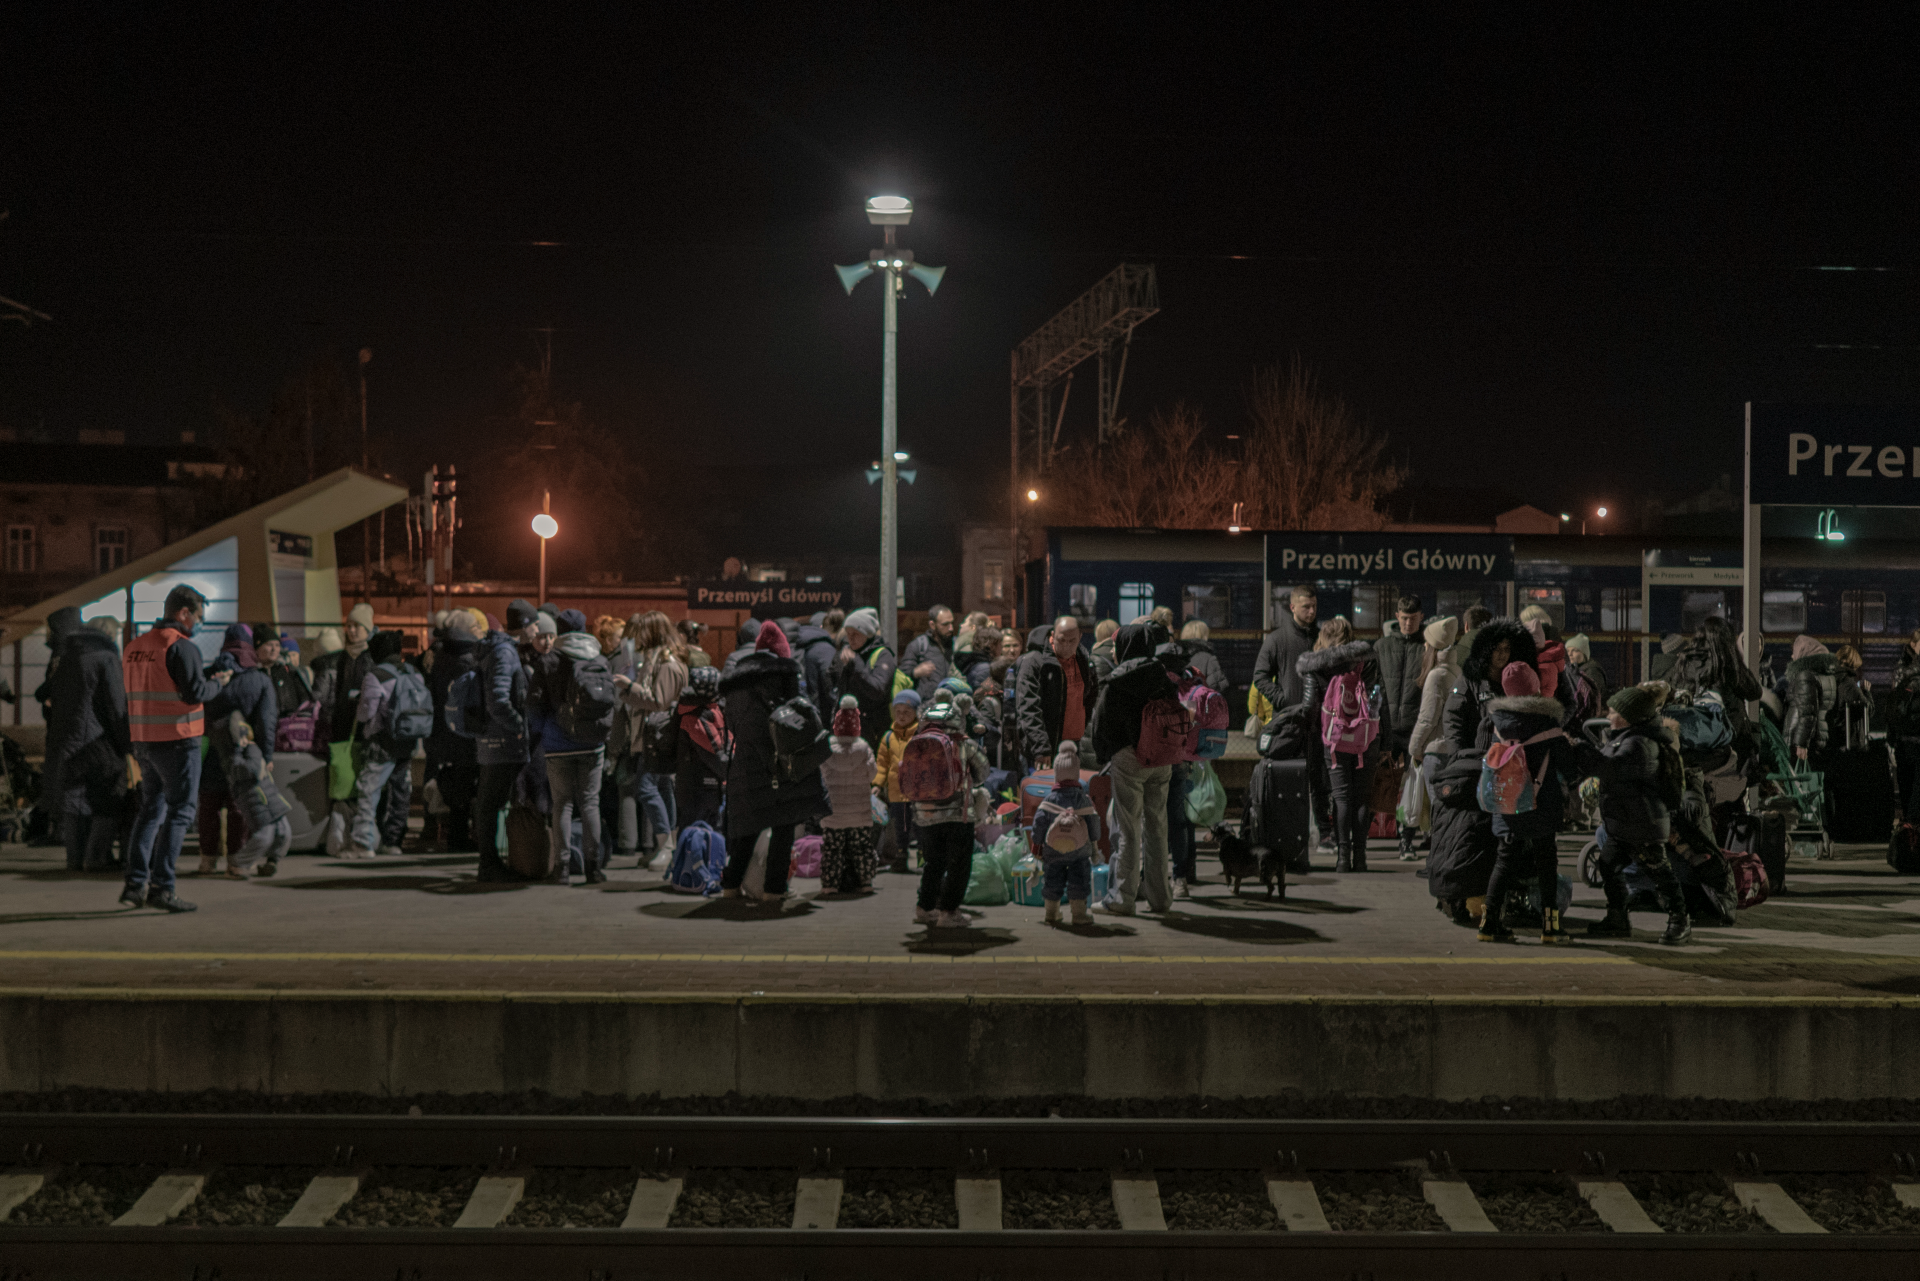 A large group of Ukranian refugees gather at a railway station in Poland after fleeing the war in Ukraine.